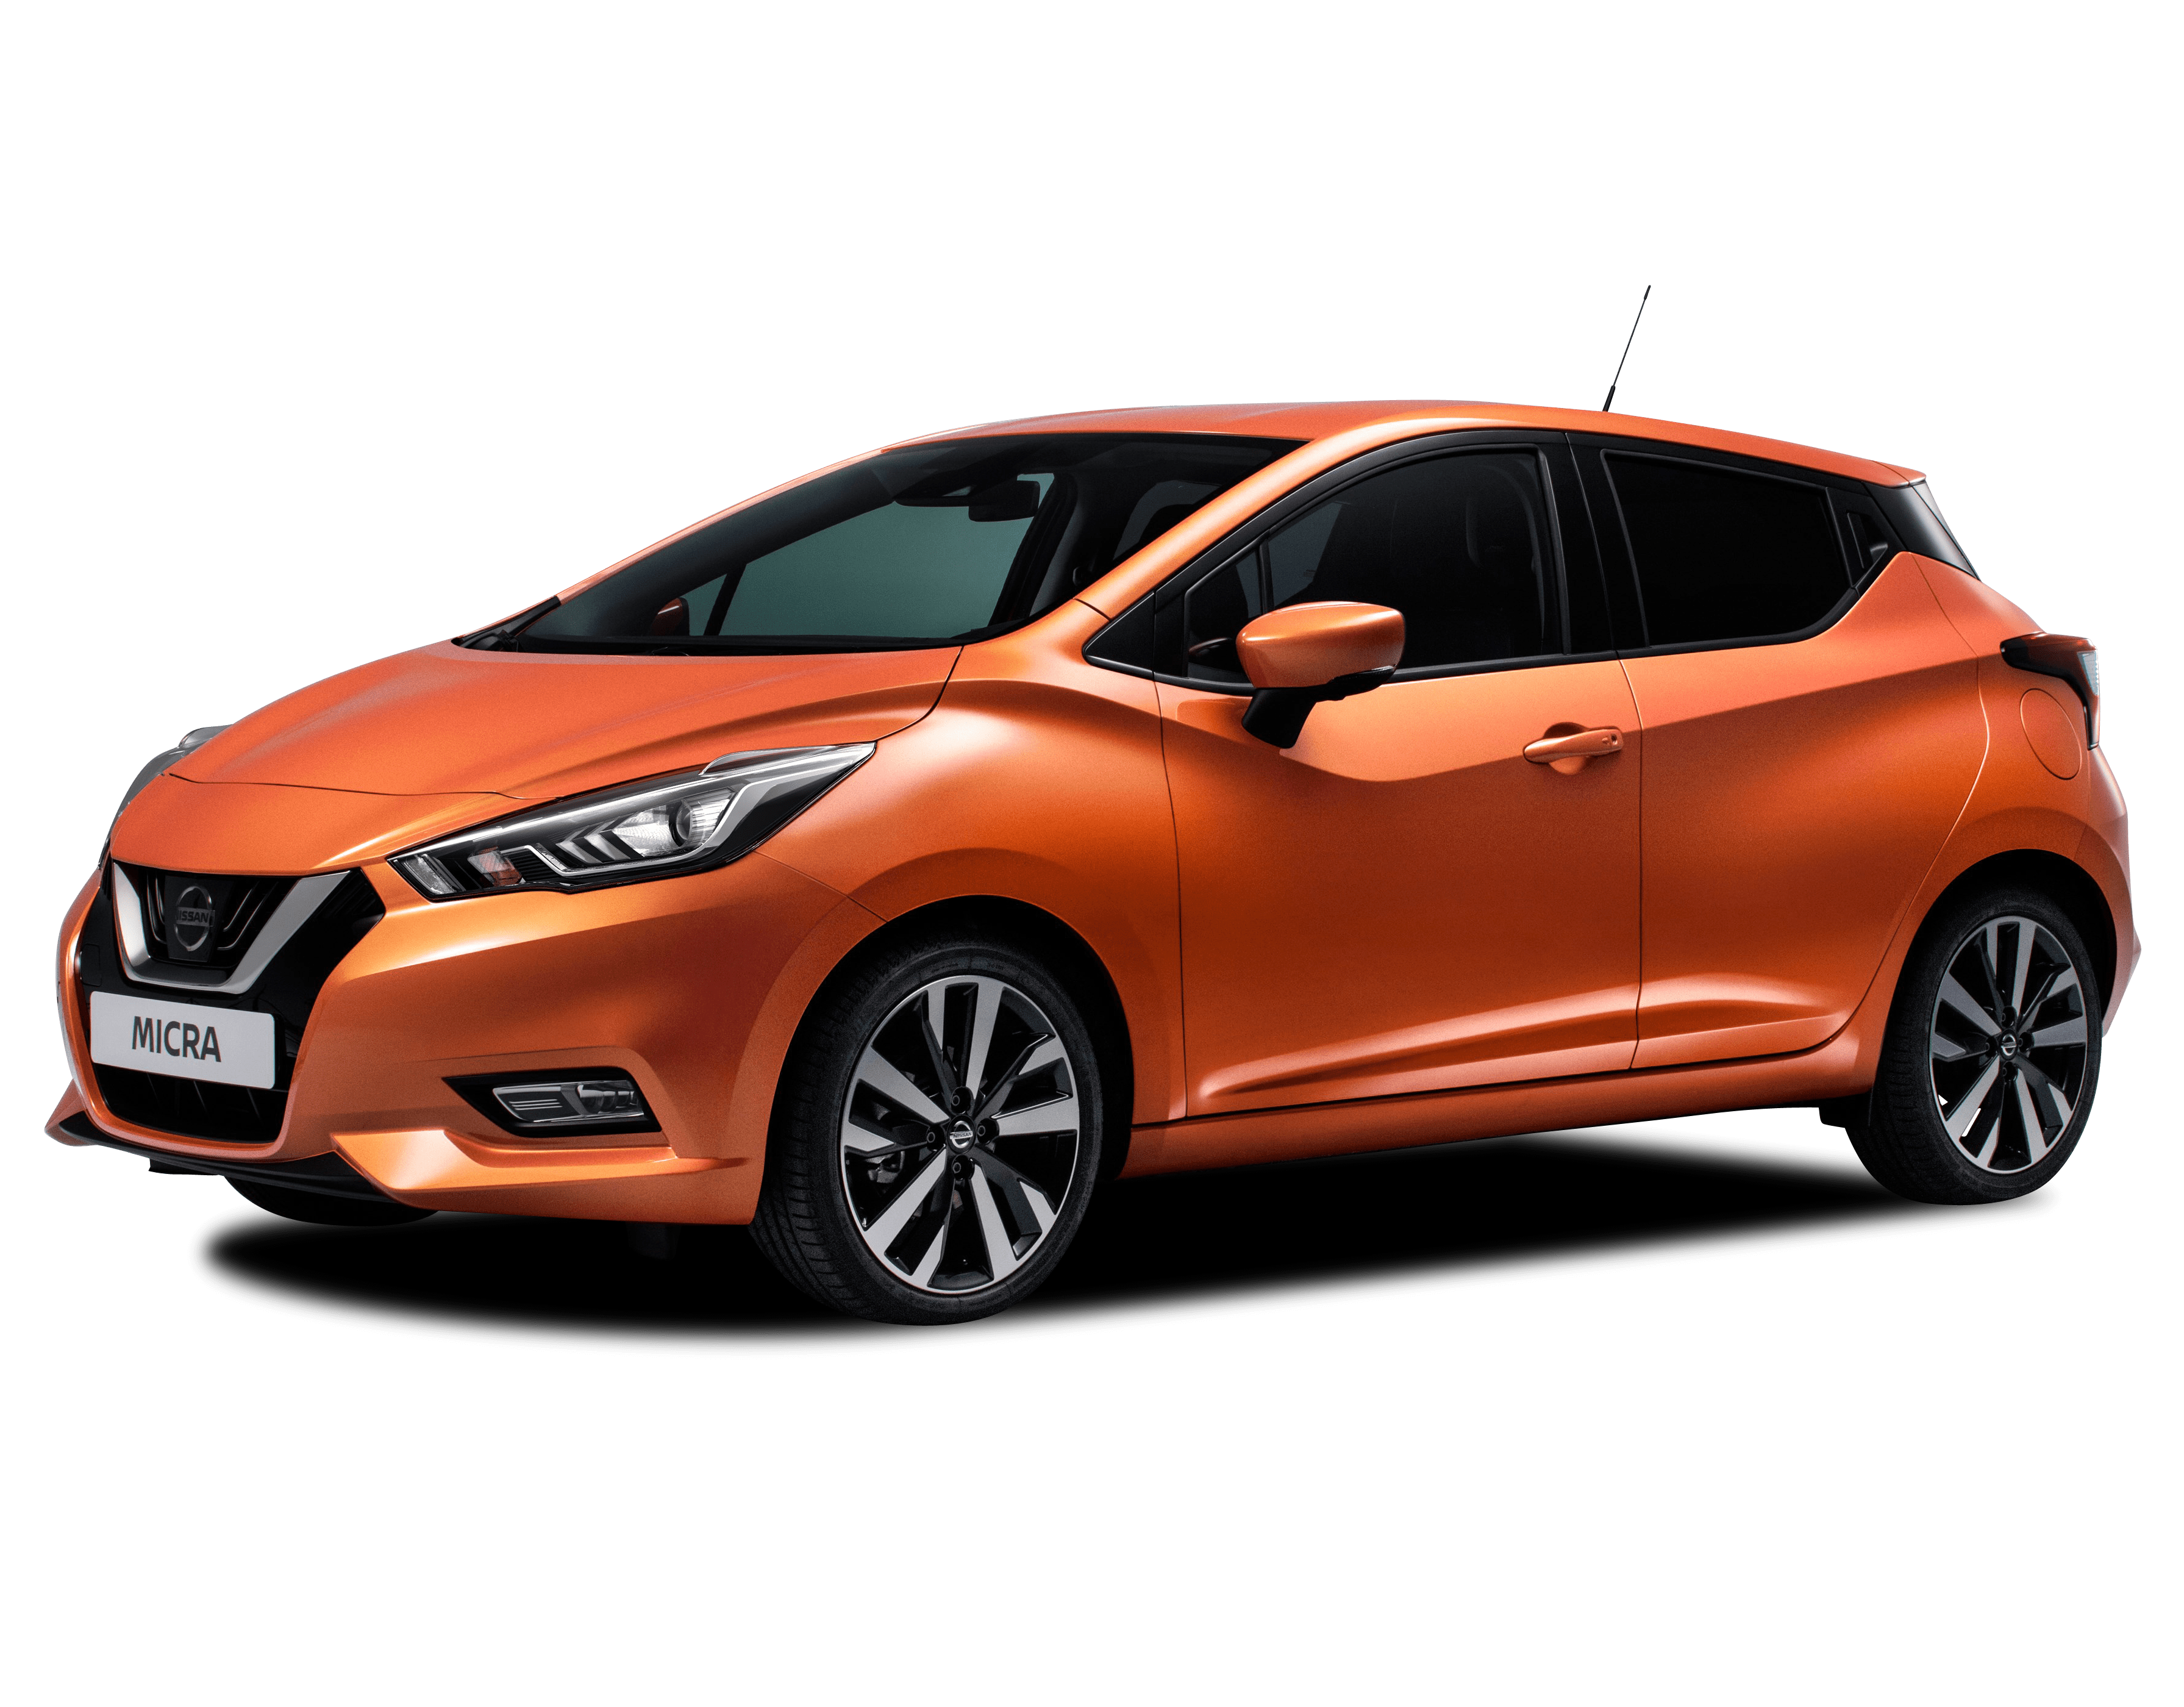 Nissan Micra Review, For Sale, Specs, Models & News in Australia